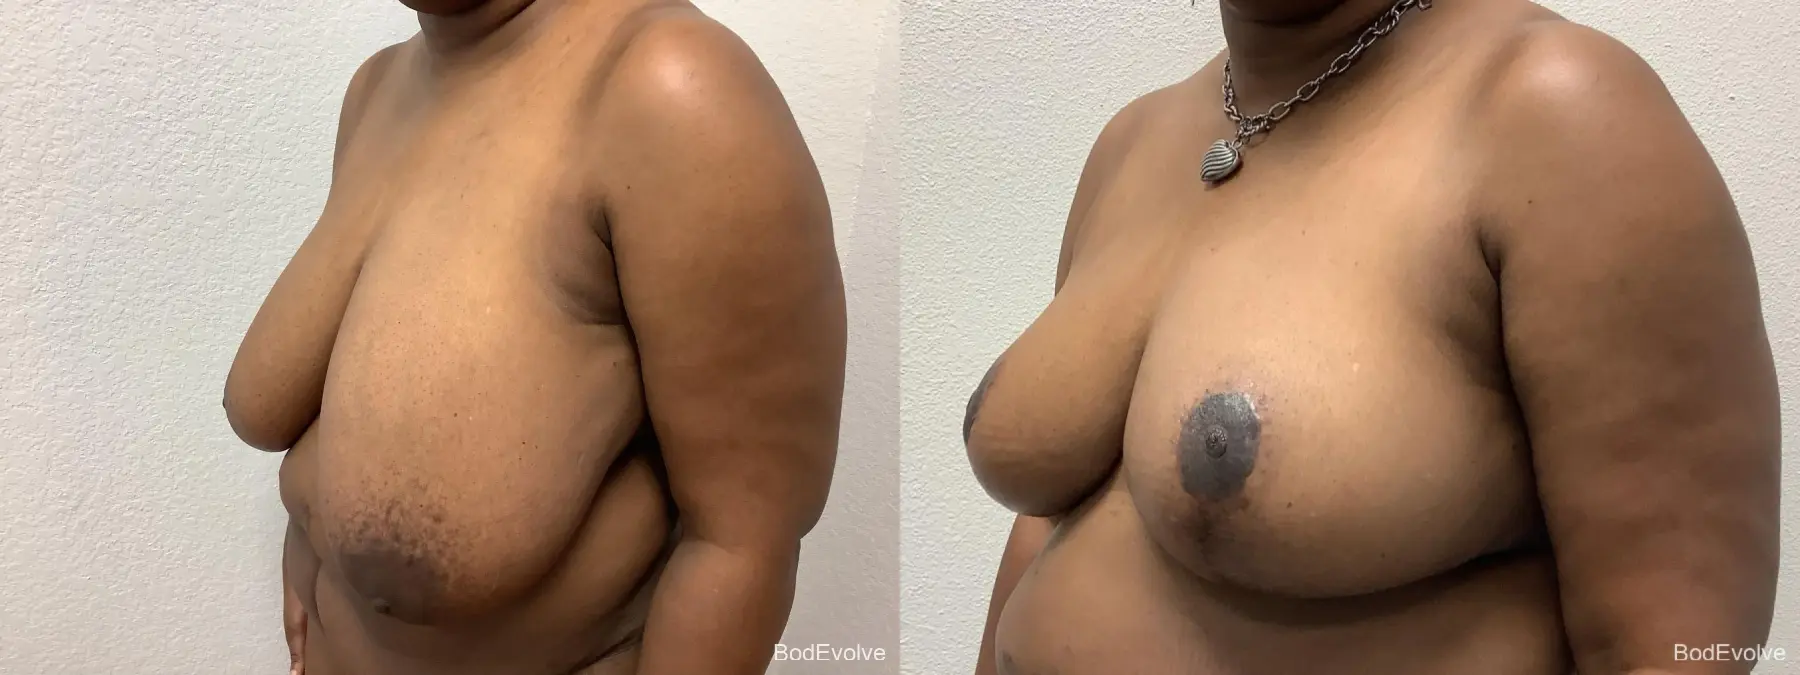 Breast Reduction: Patient 5 - Before and After 2